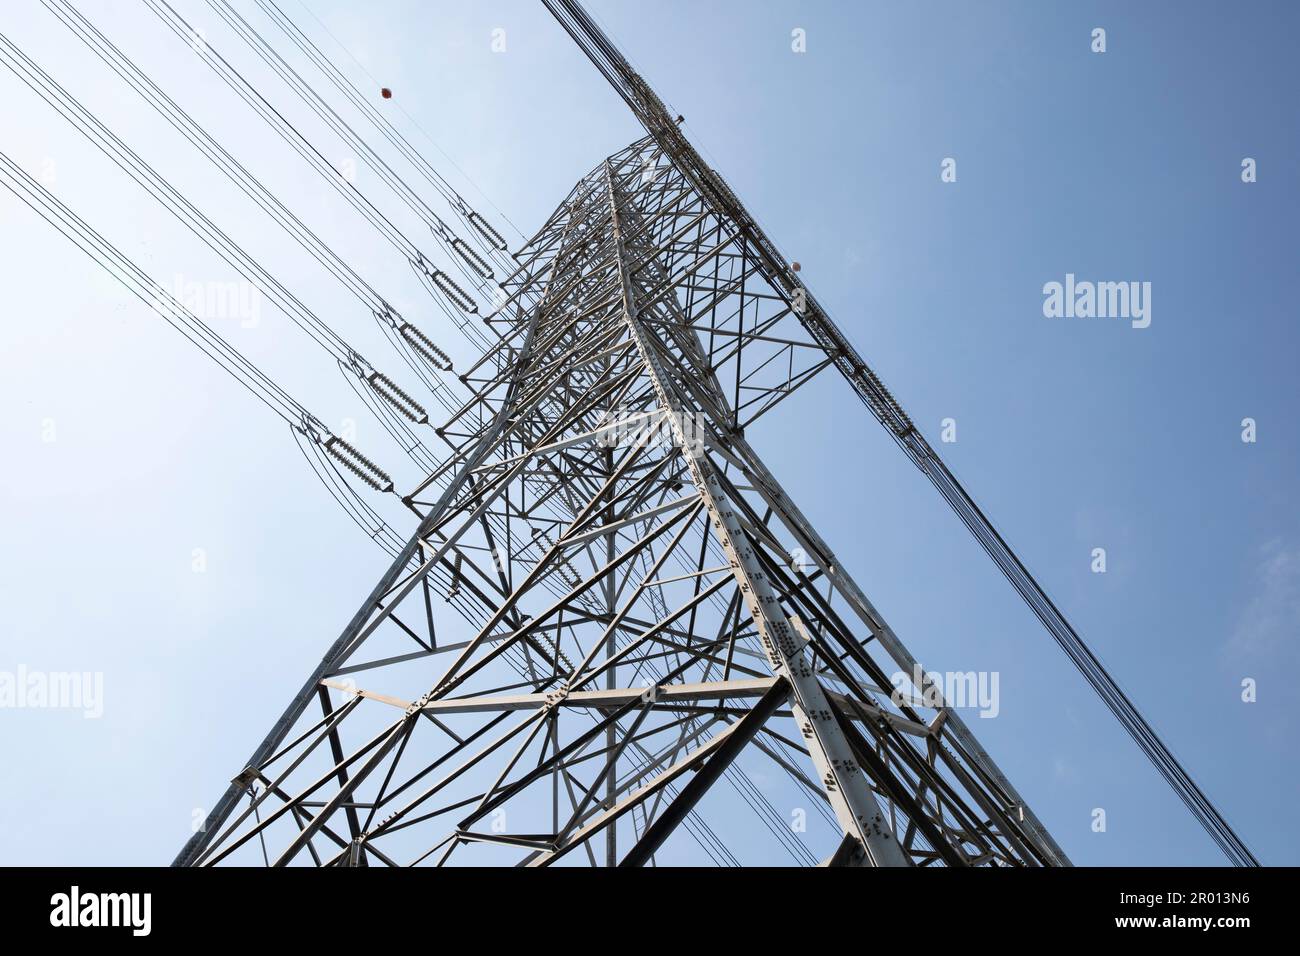 High voltage electric power lines on pylons with blue sky background. Stock Photo